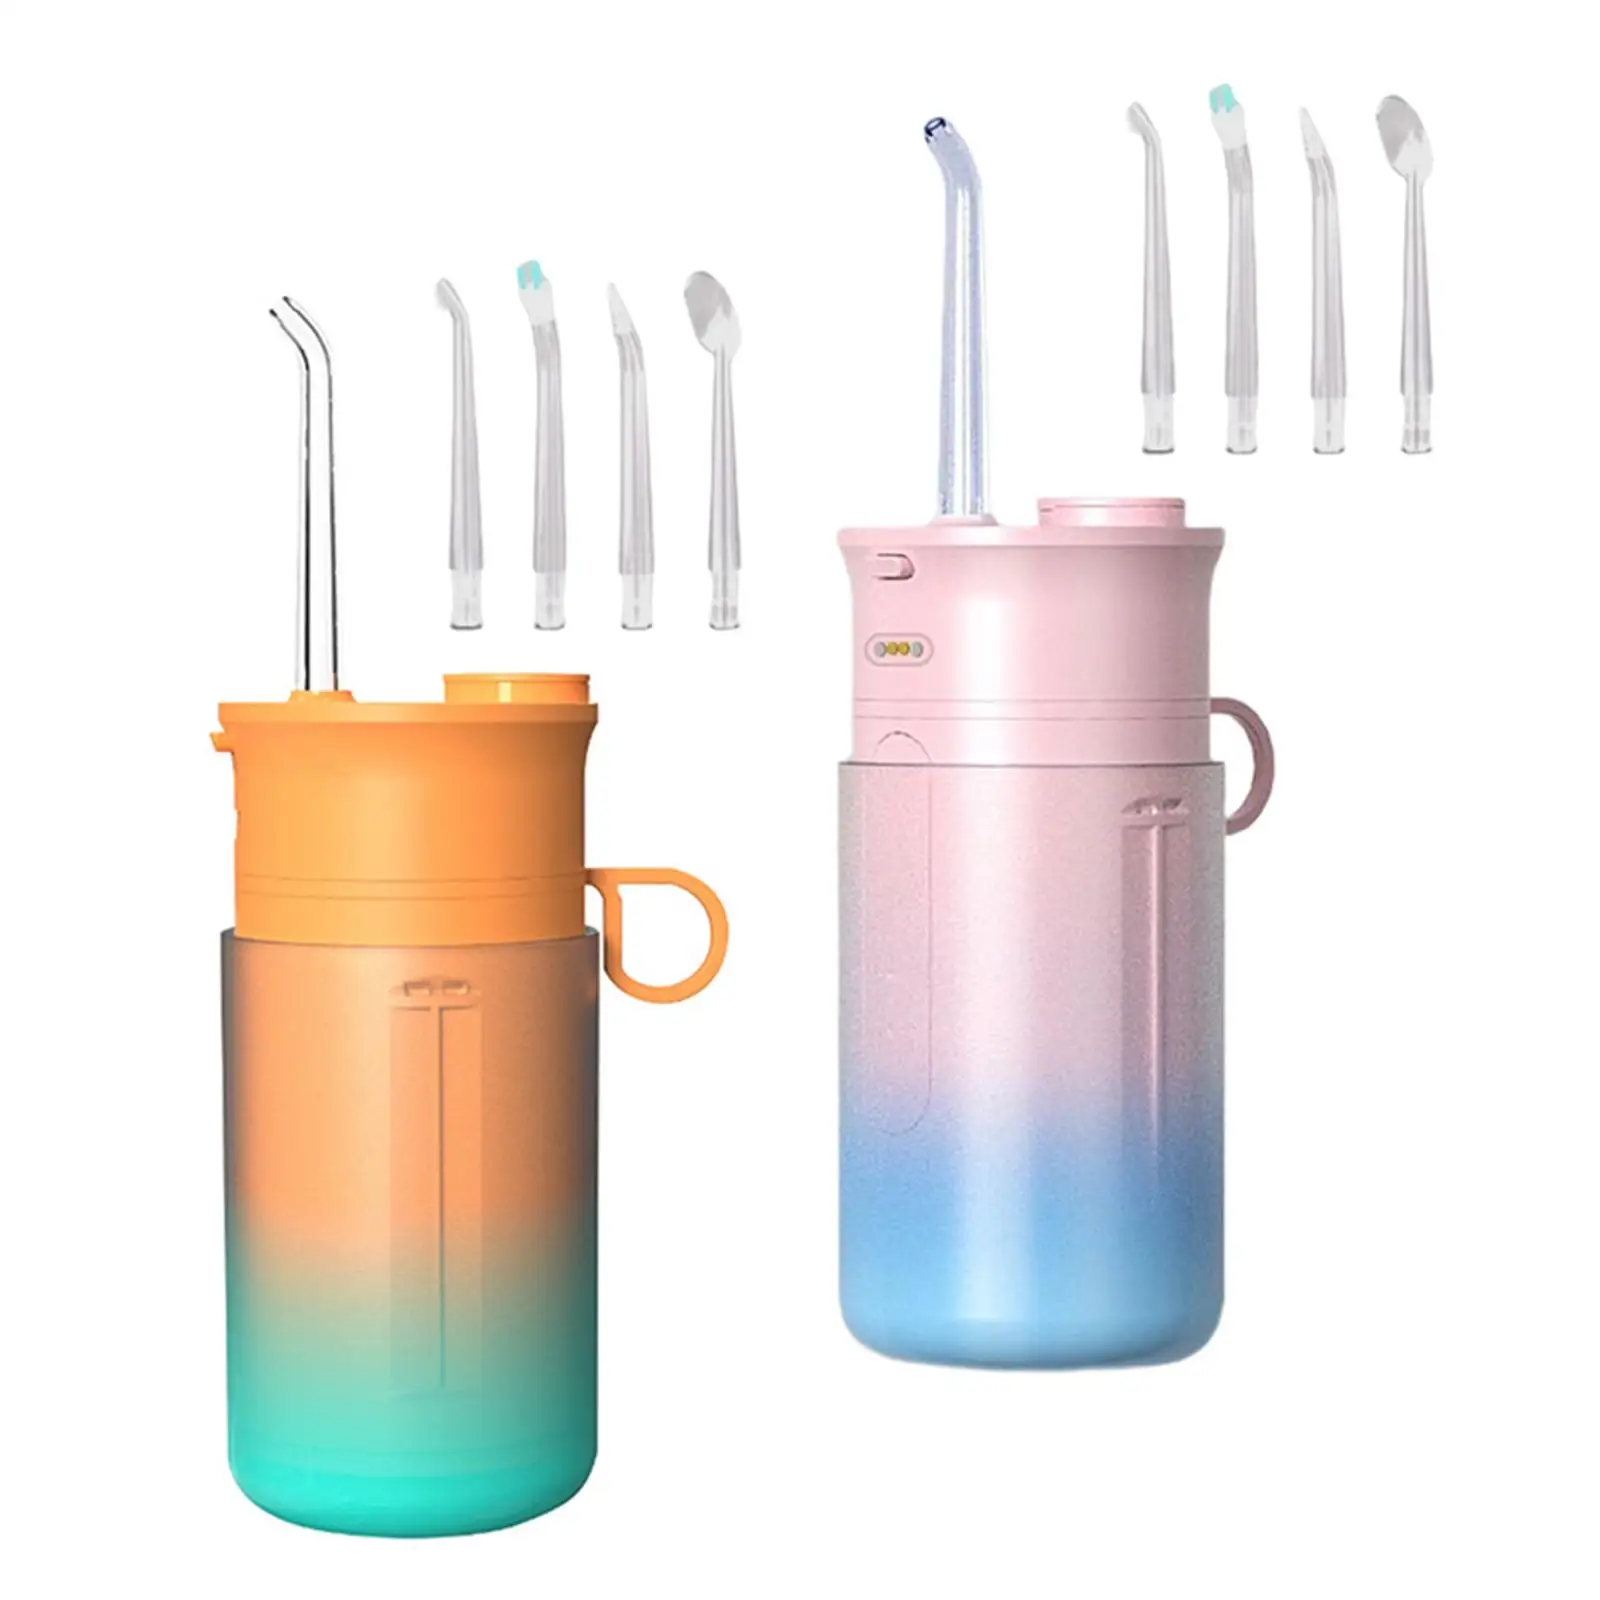 Telescopic Oral Irrigator Electric Flosser Oral Flossing Irrigator Rechargeable IPX7 Professional with 3 Modes 